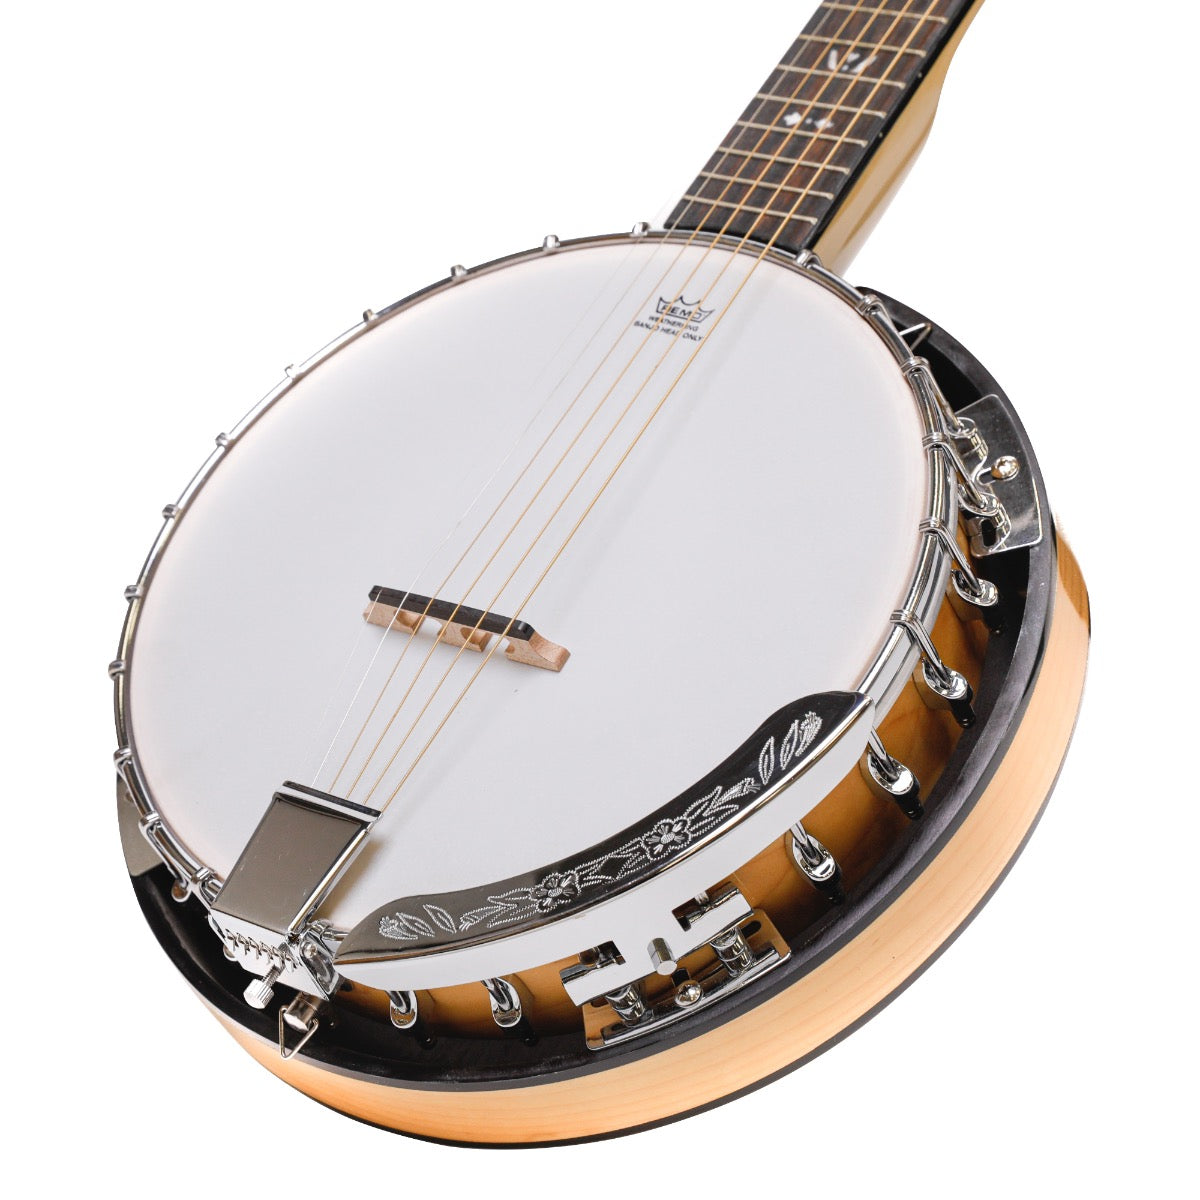 HEARTLAND 6 STRING DELUXE IRISH BANJO LEFT HANDED 24 BRACKET WITH CLOSED SOLID BACK MAPLE FINISH